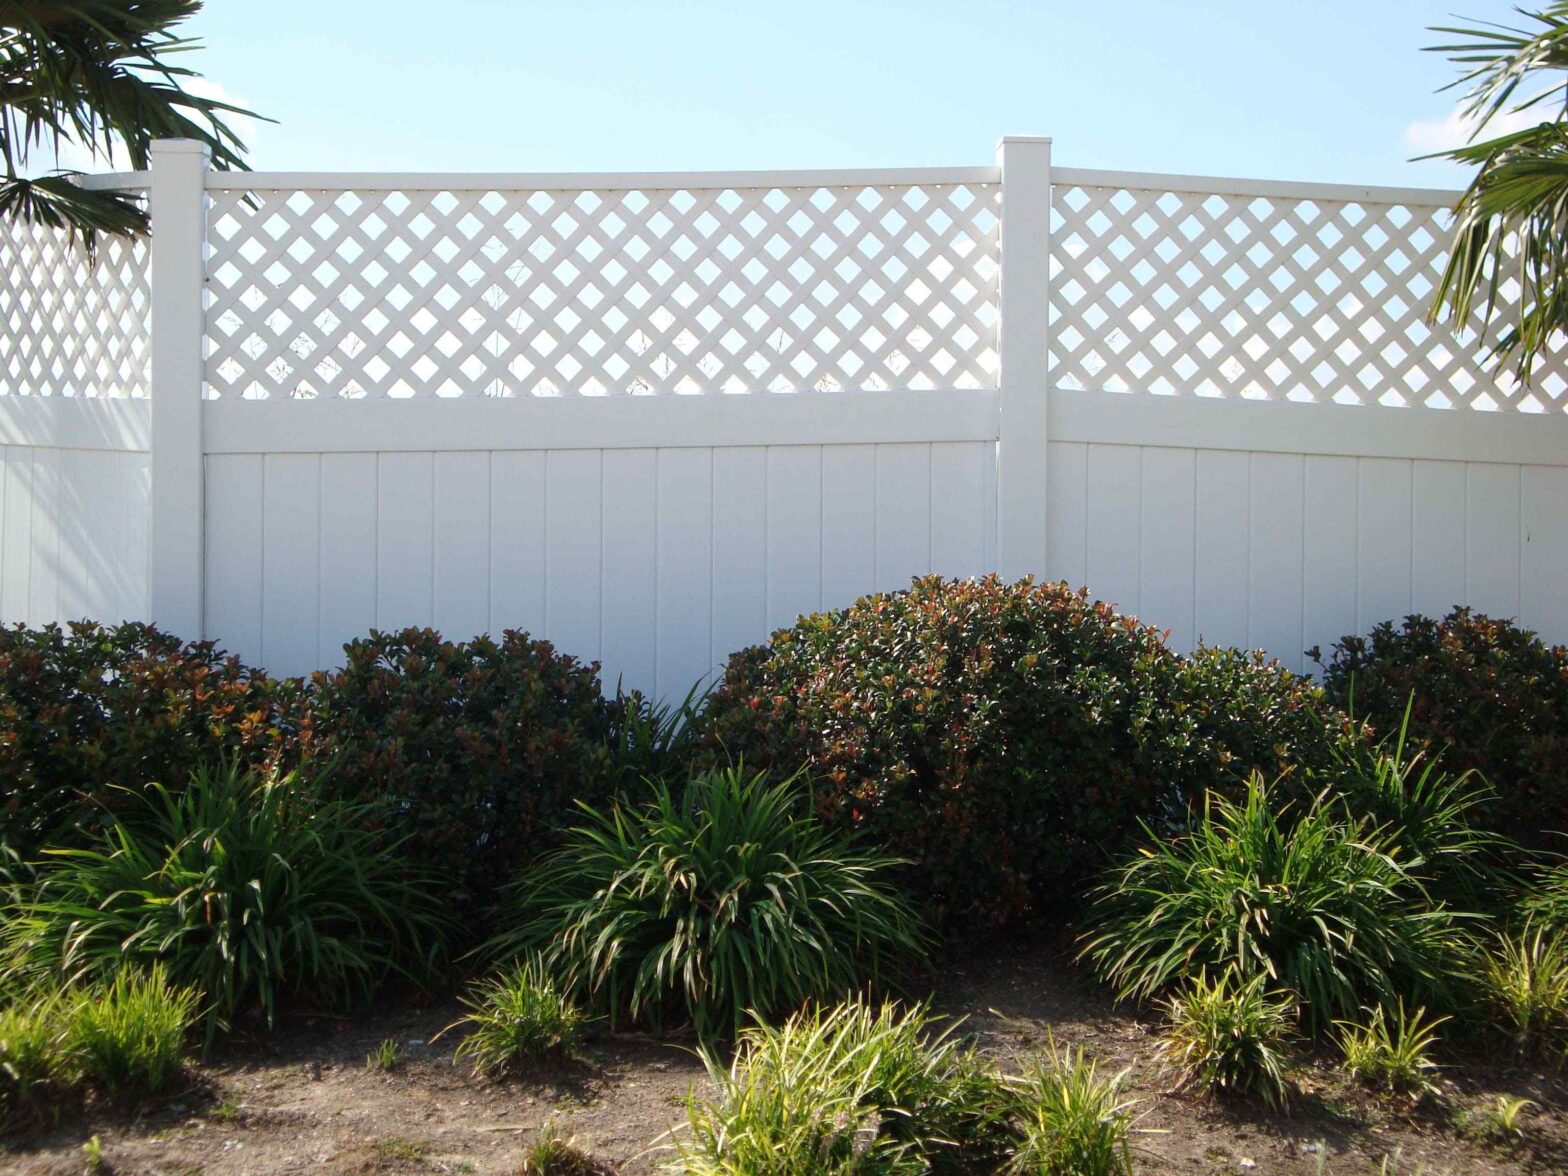 Photo of a North Dallas Fort Worth vinyl fence